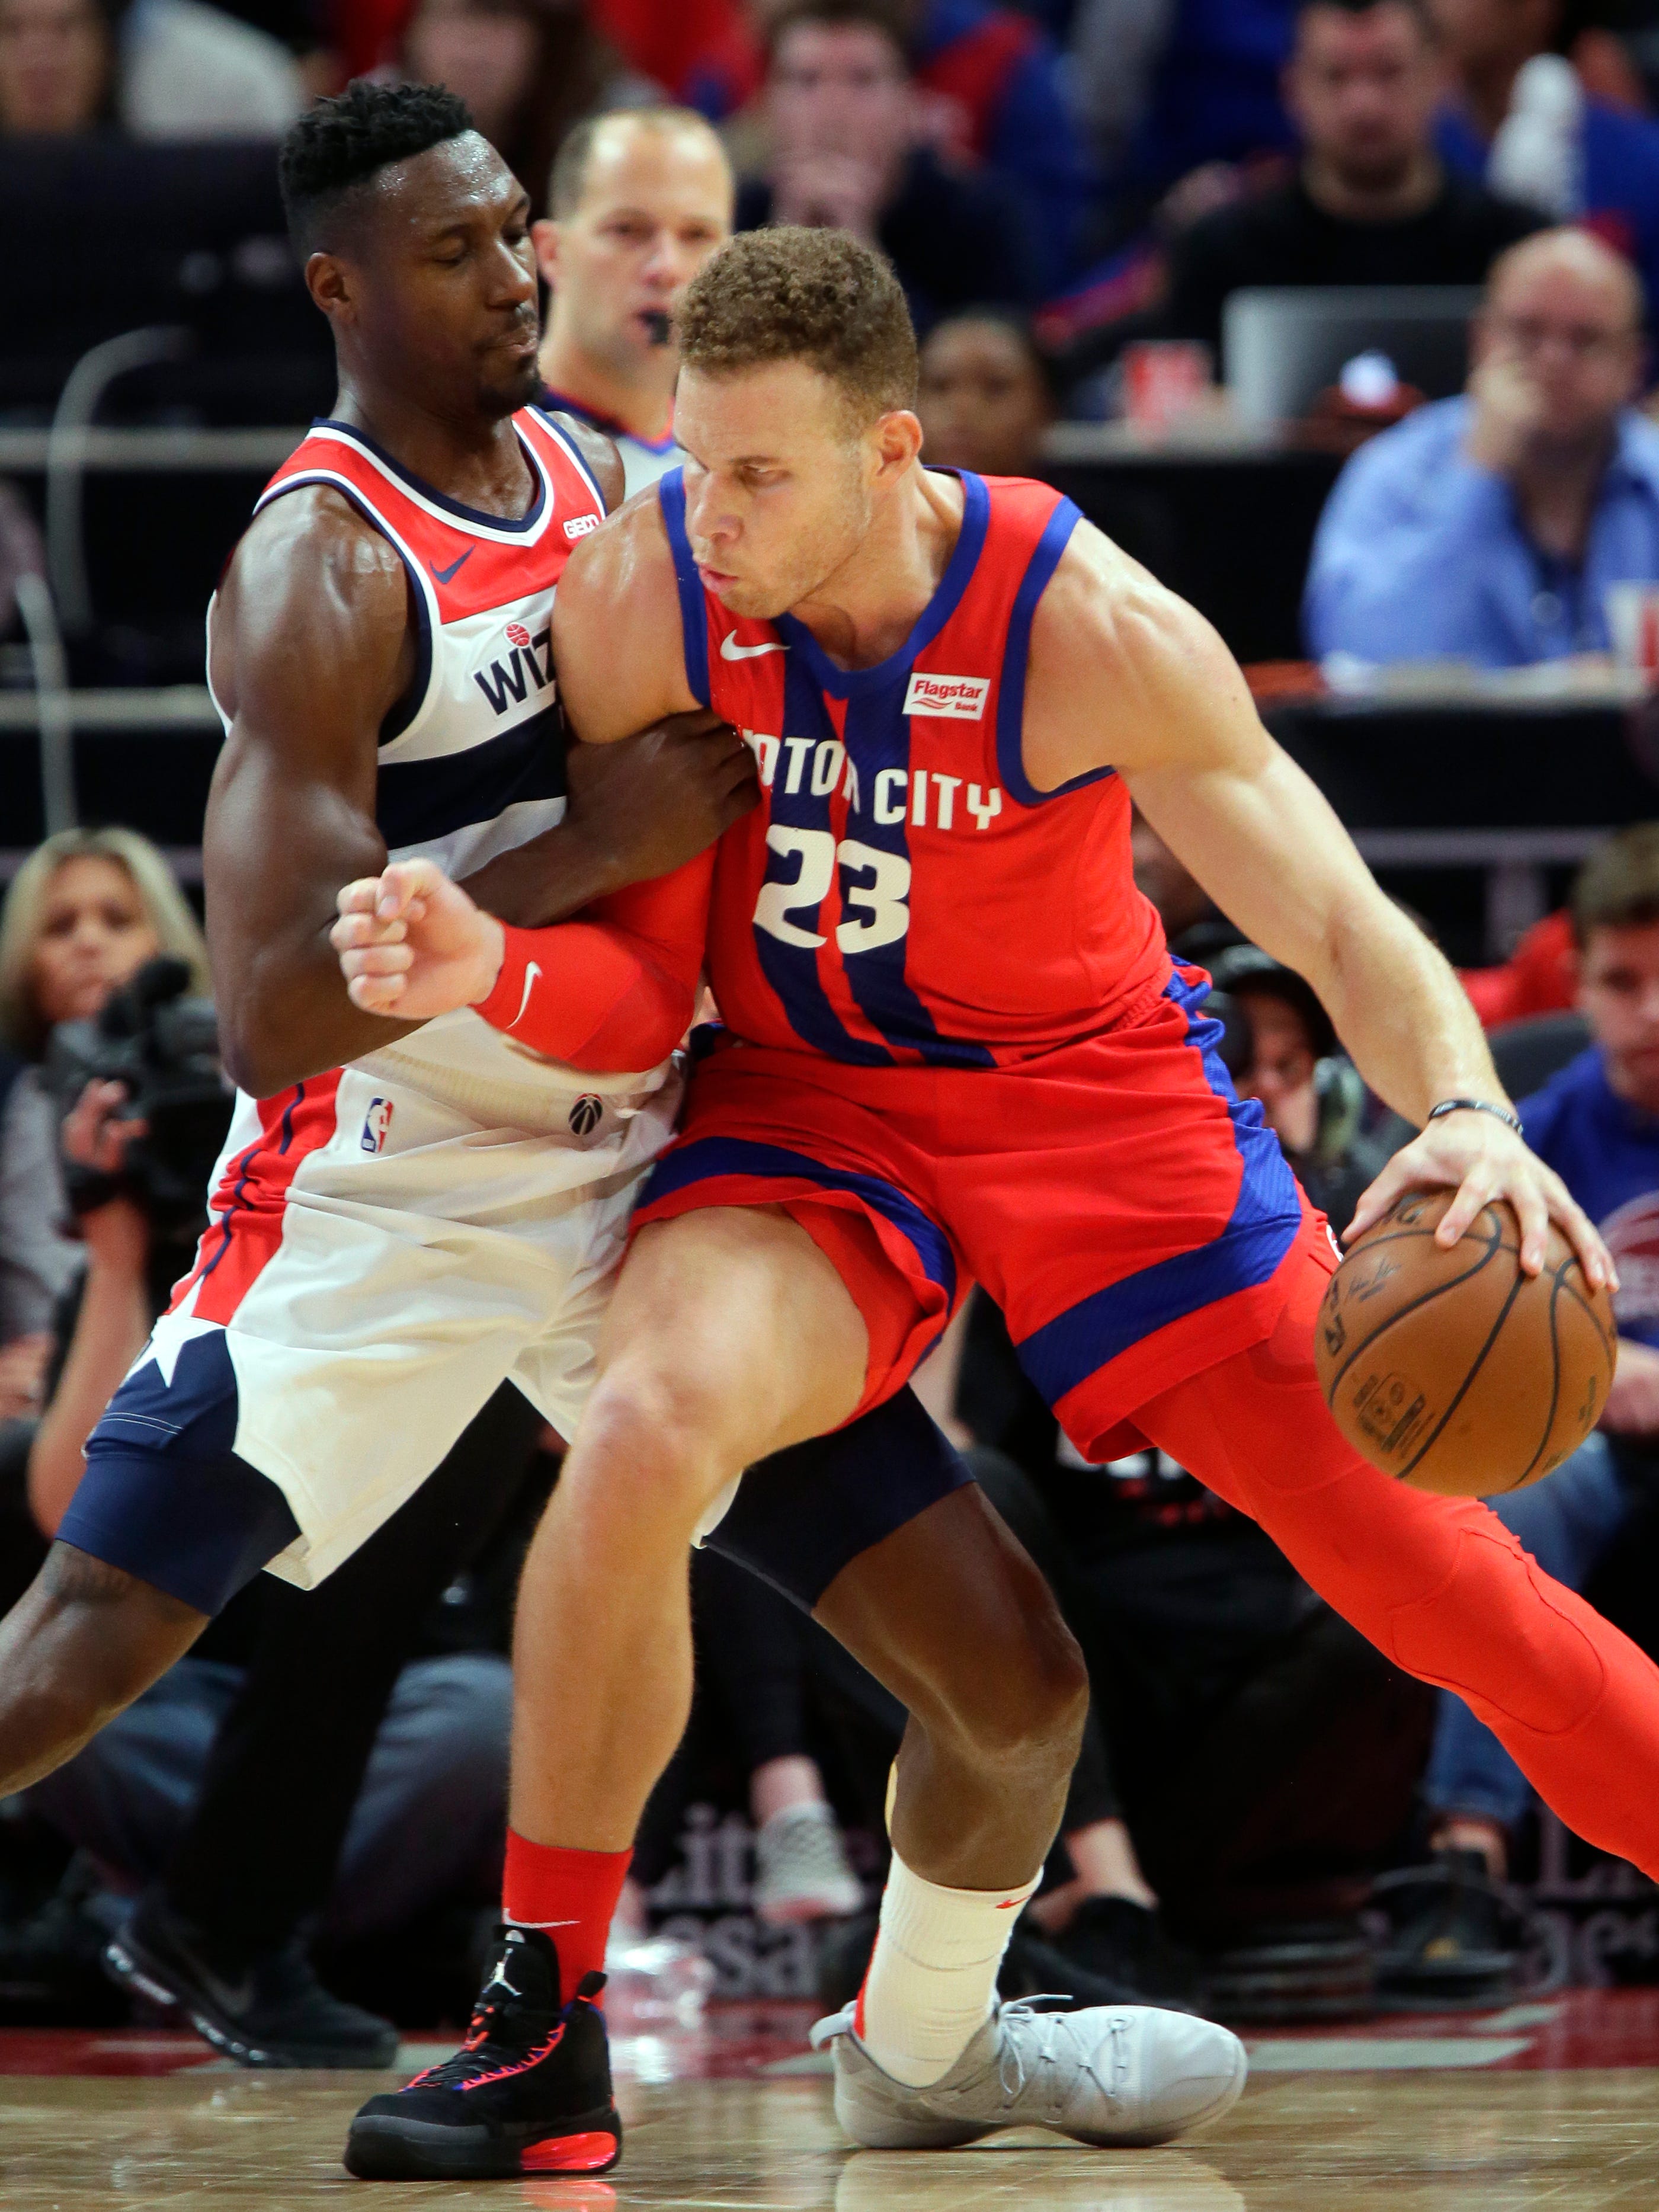 Detroit Pistons forward Blake Griffin (23) drives against Washington Wizards center Ian Mahinmi (28) during the second half.